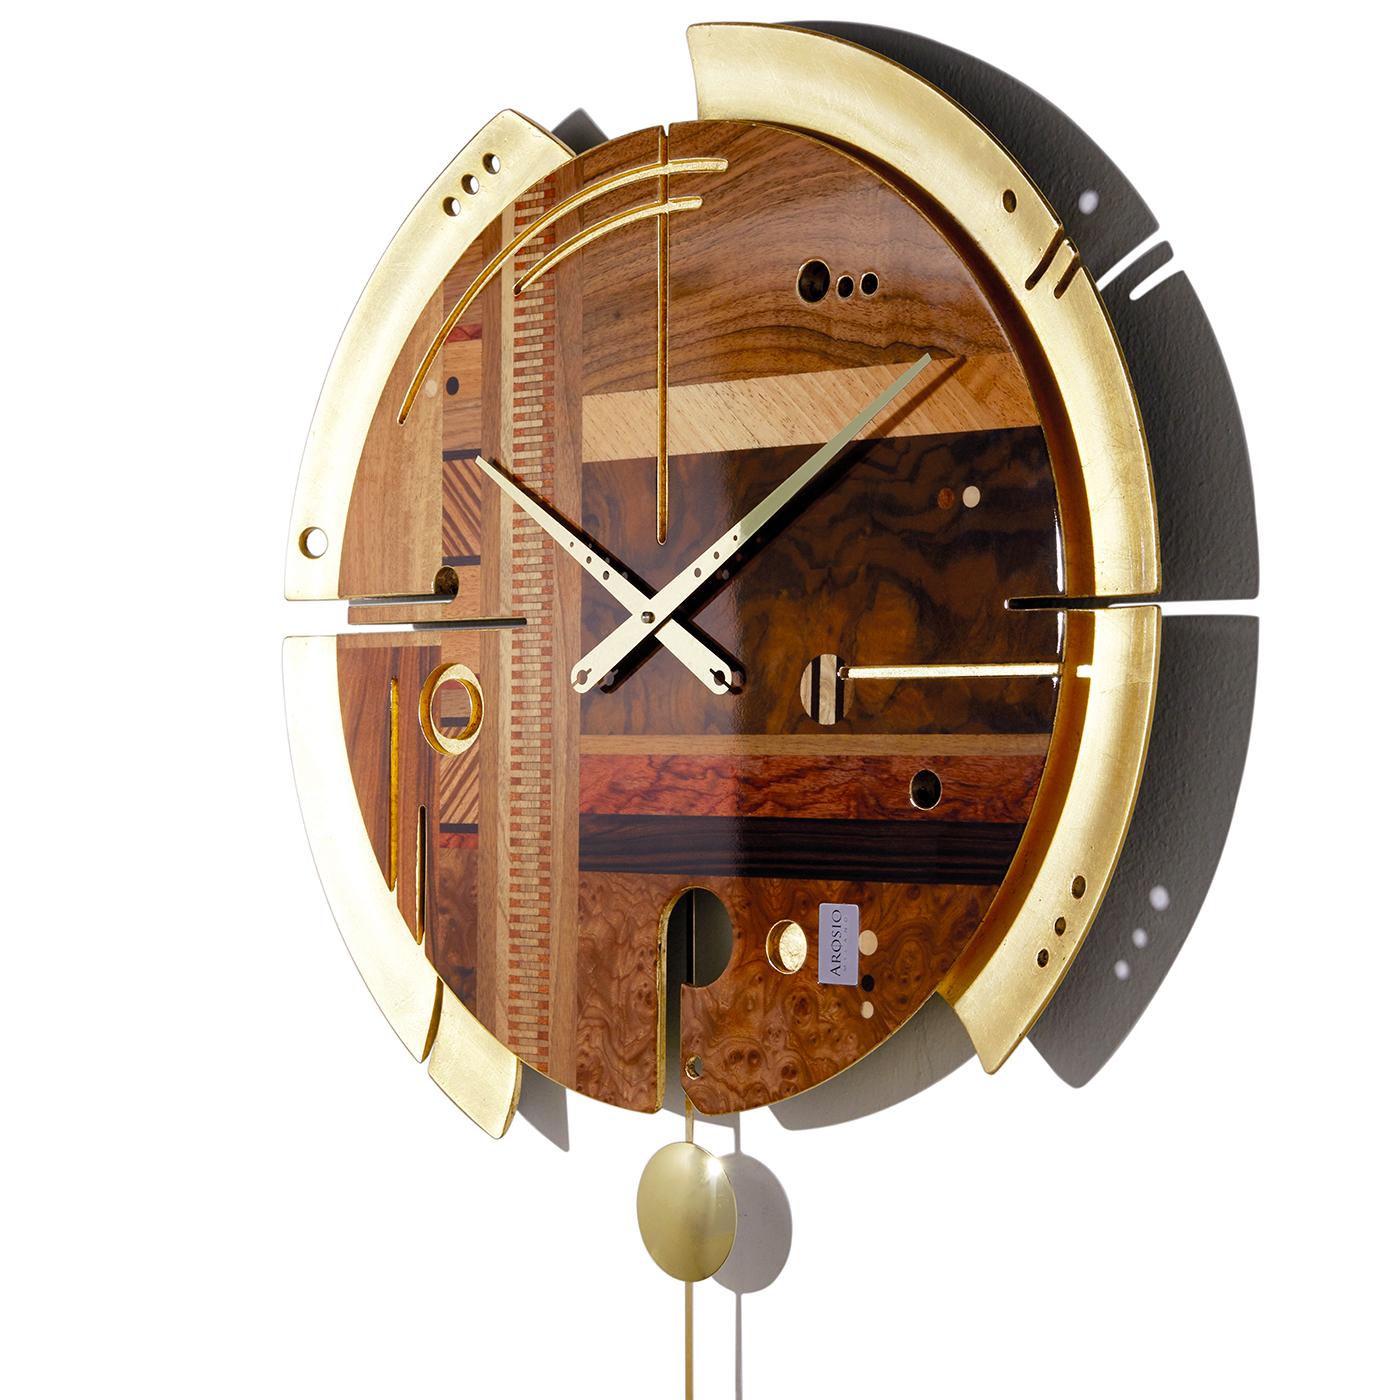 Part of a special edition, this wall clock is an exquisite addition to a modern interior. Its structure in wood pulp with a silent quartz mechanism made in Germany is adorned with a face boasting elm and walnut briarwood with rosewood, Bubinga,